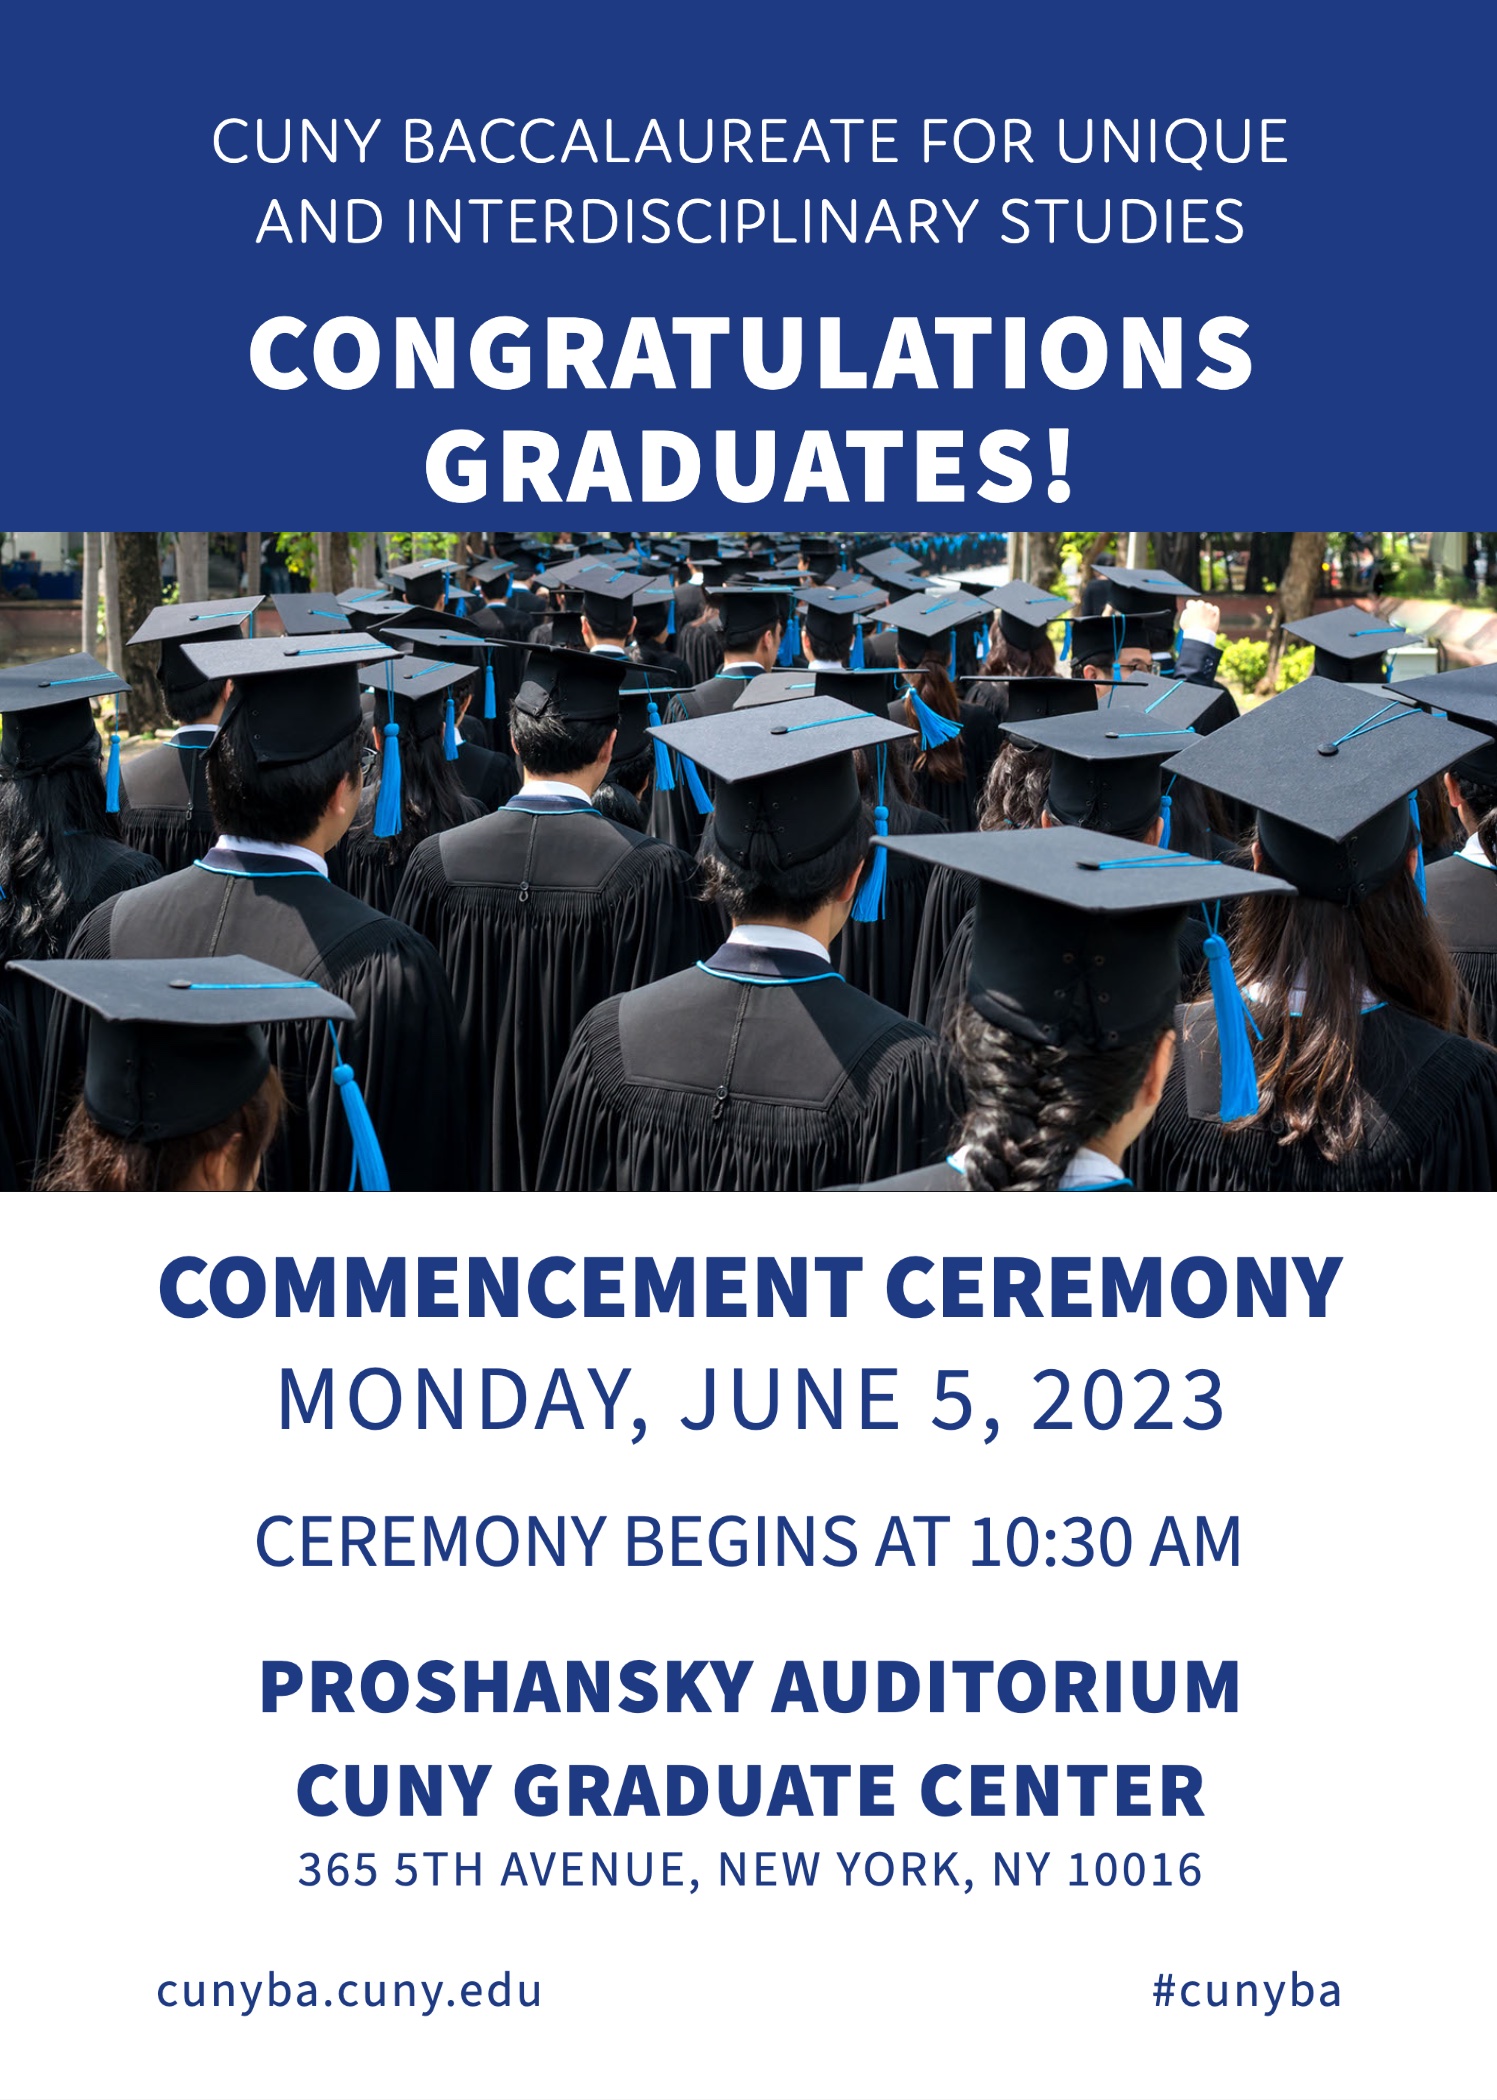 Commencement 2023 poster congtratulating gratuates, with a photo of graduates in caps and gowns followed by the date and time of the commencement ceremony.